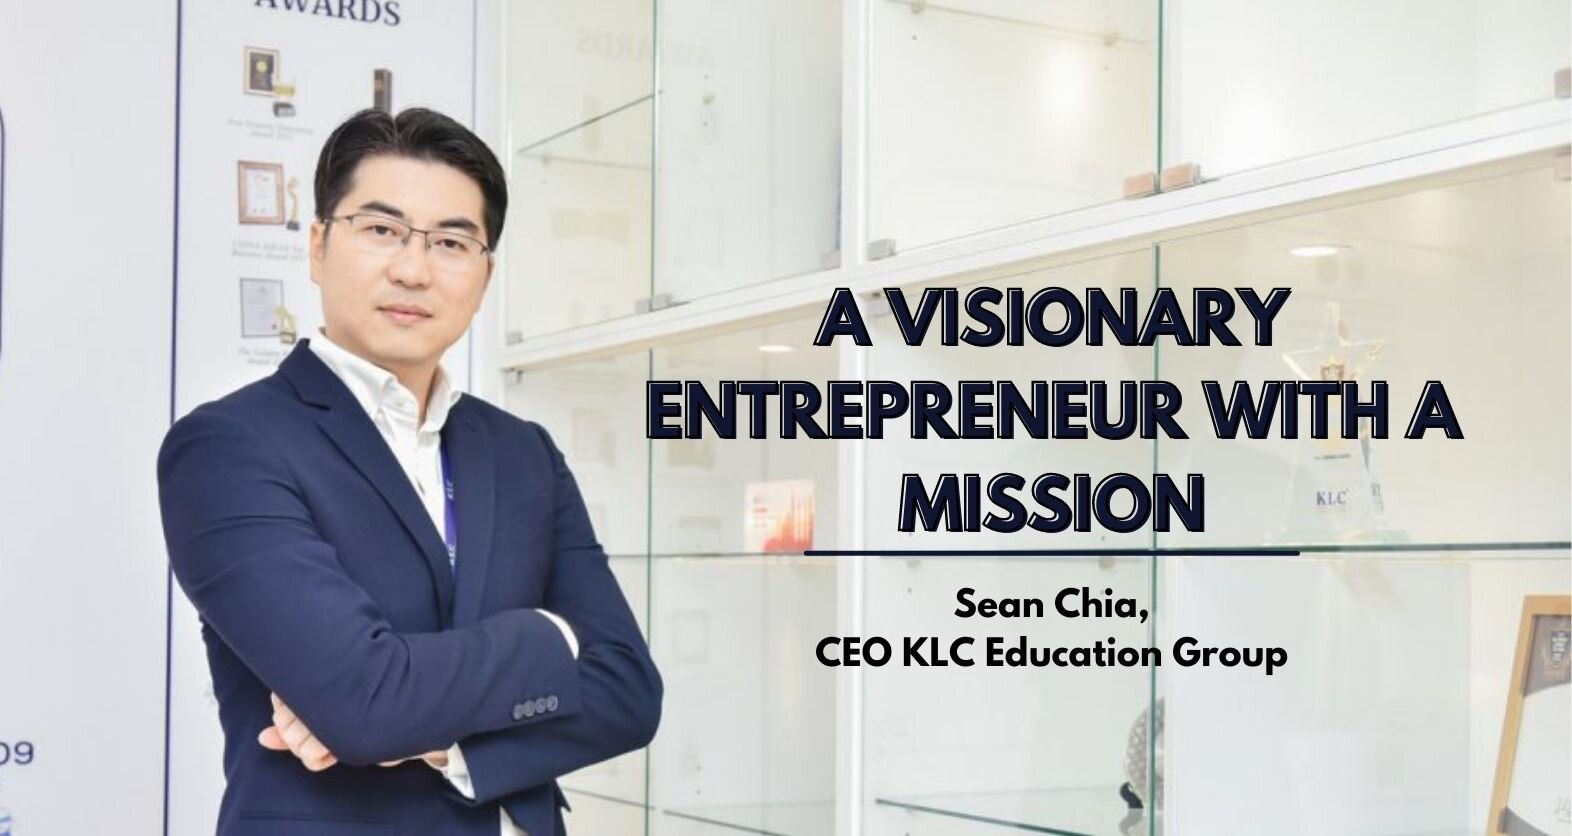 A VISIONARY ENTREPRENEUR WITH A MISSION